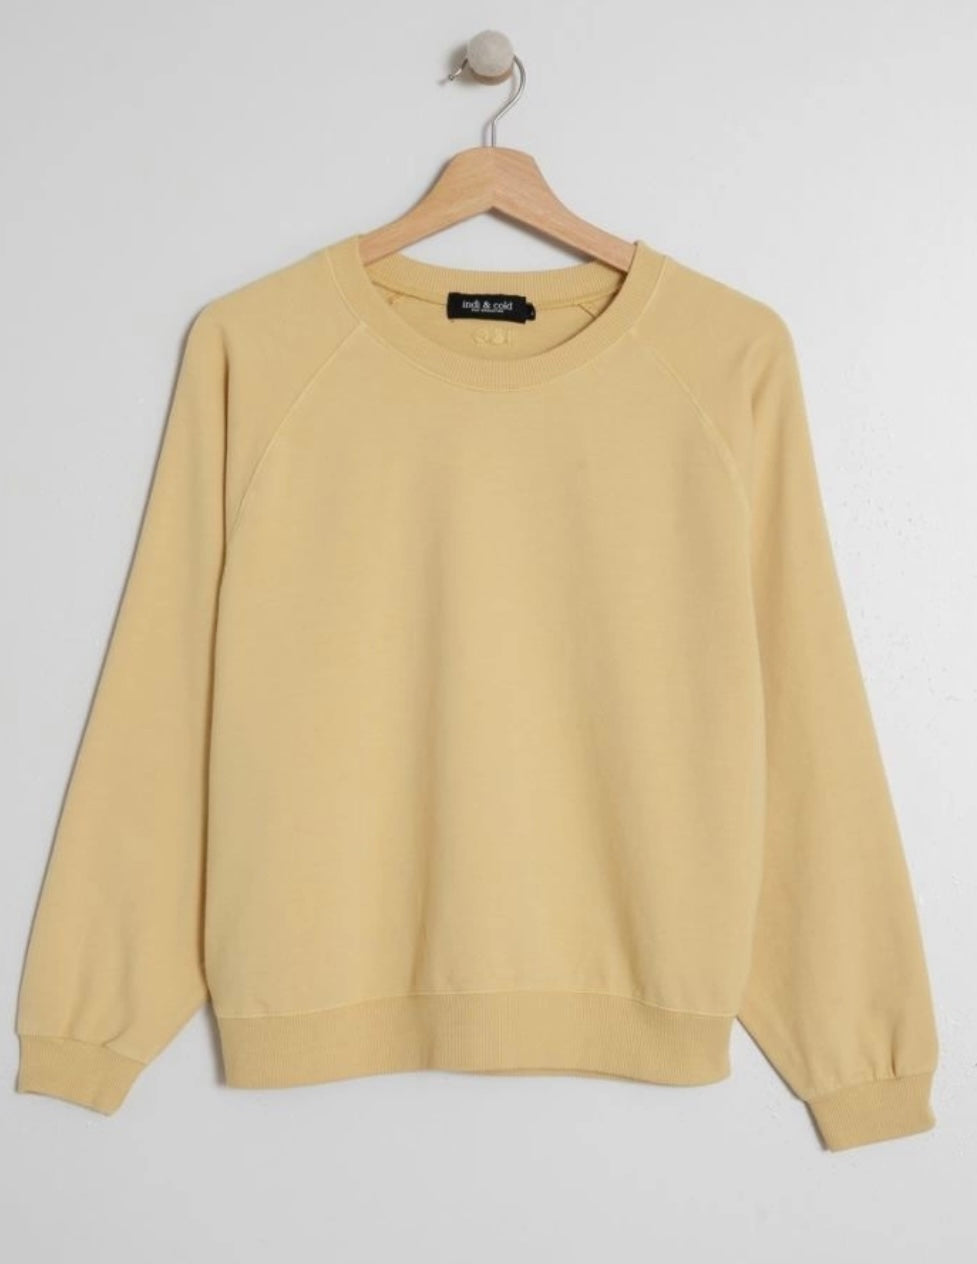 INDI&COLD Pullover, gelb